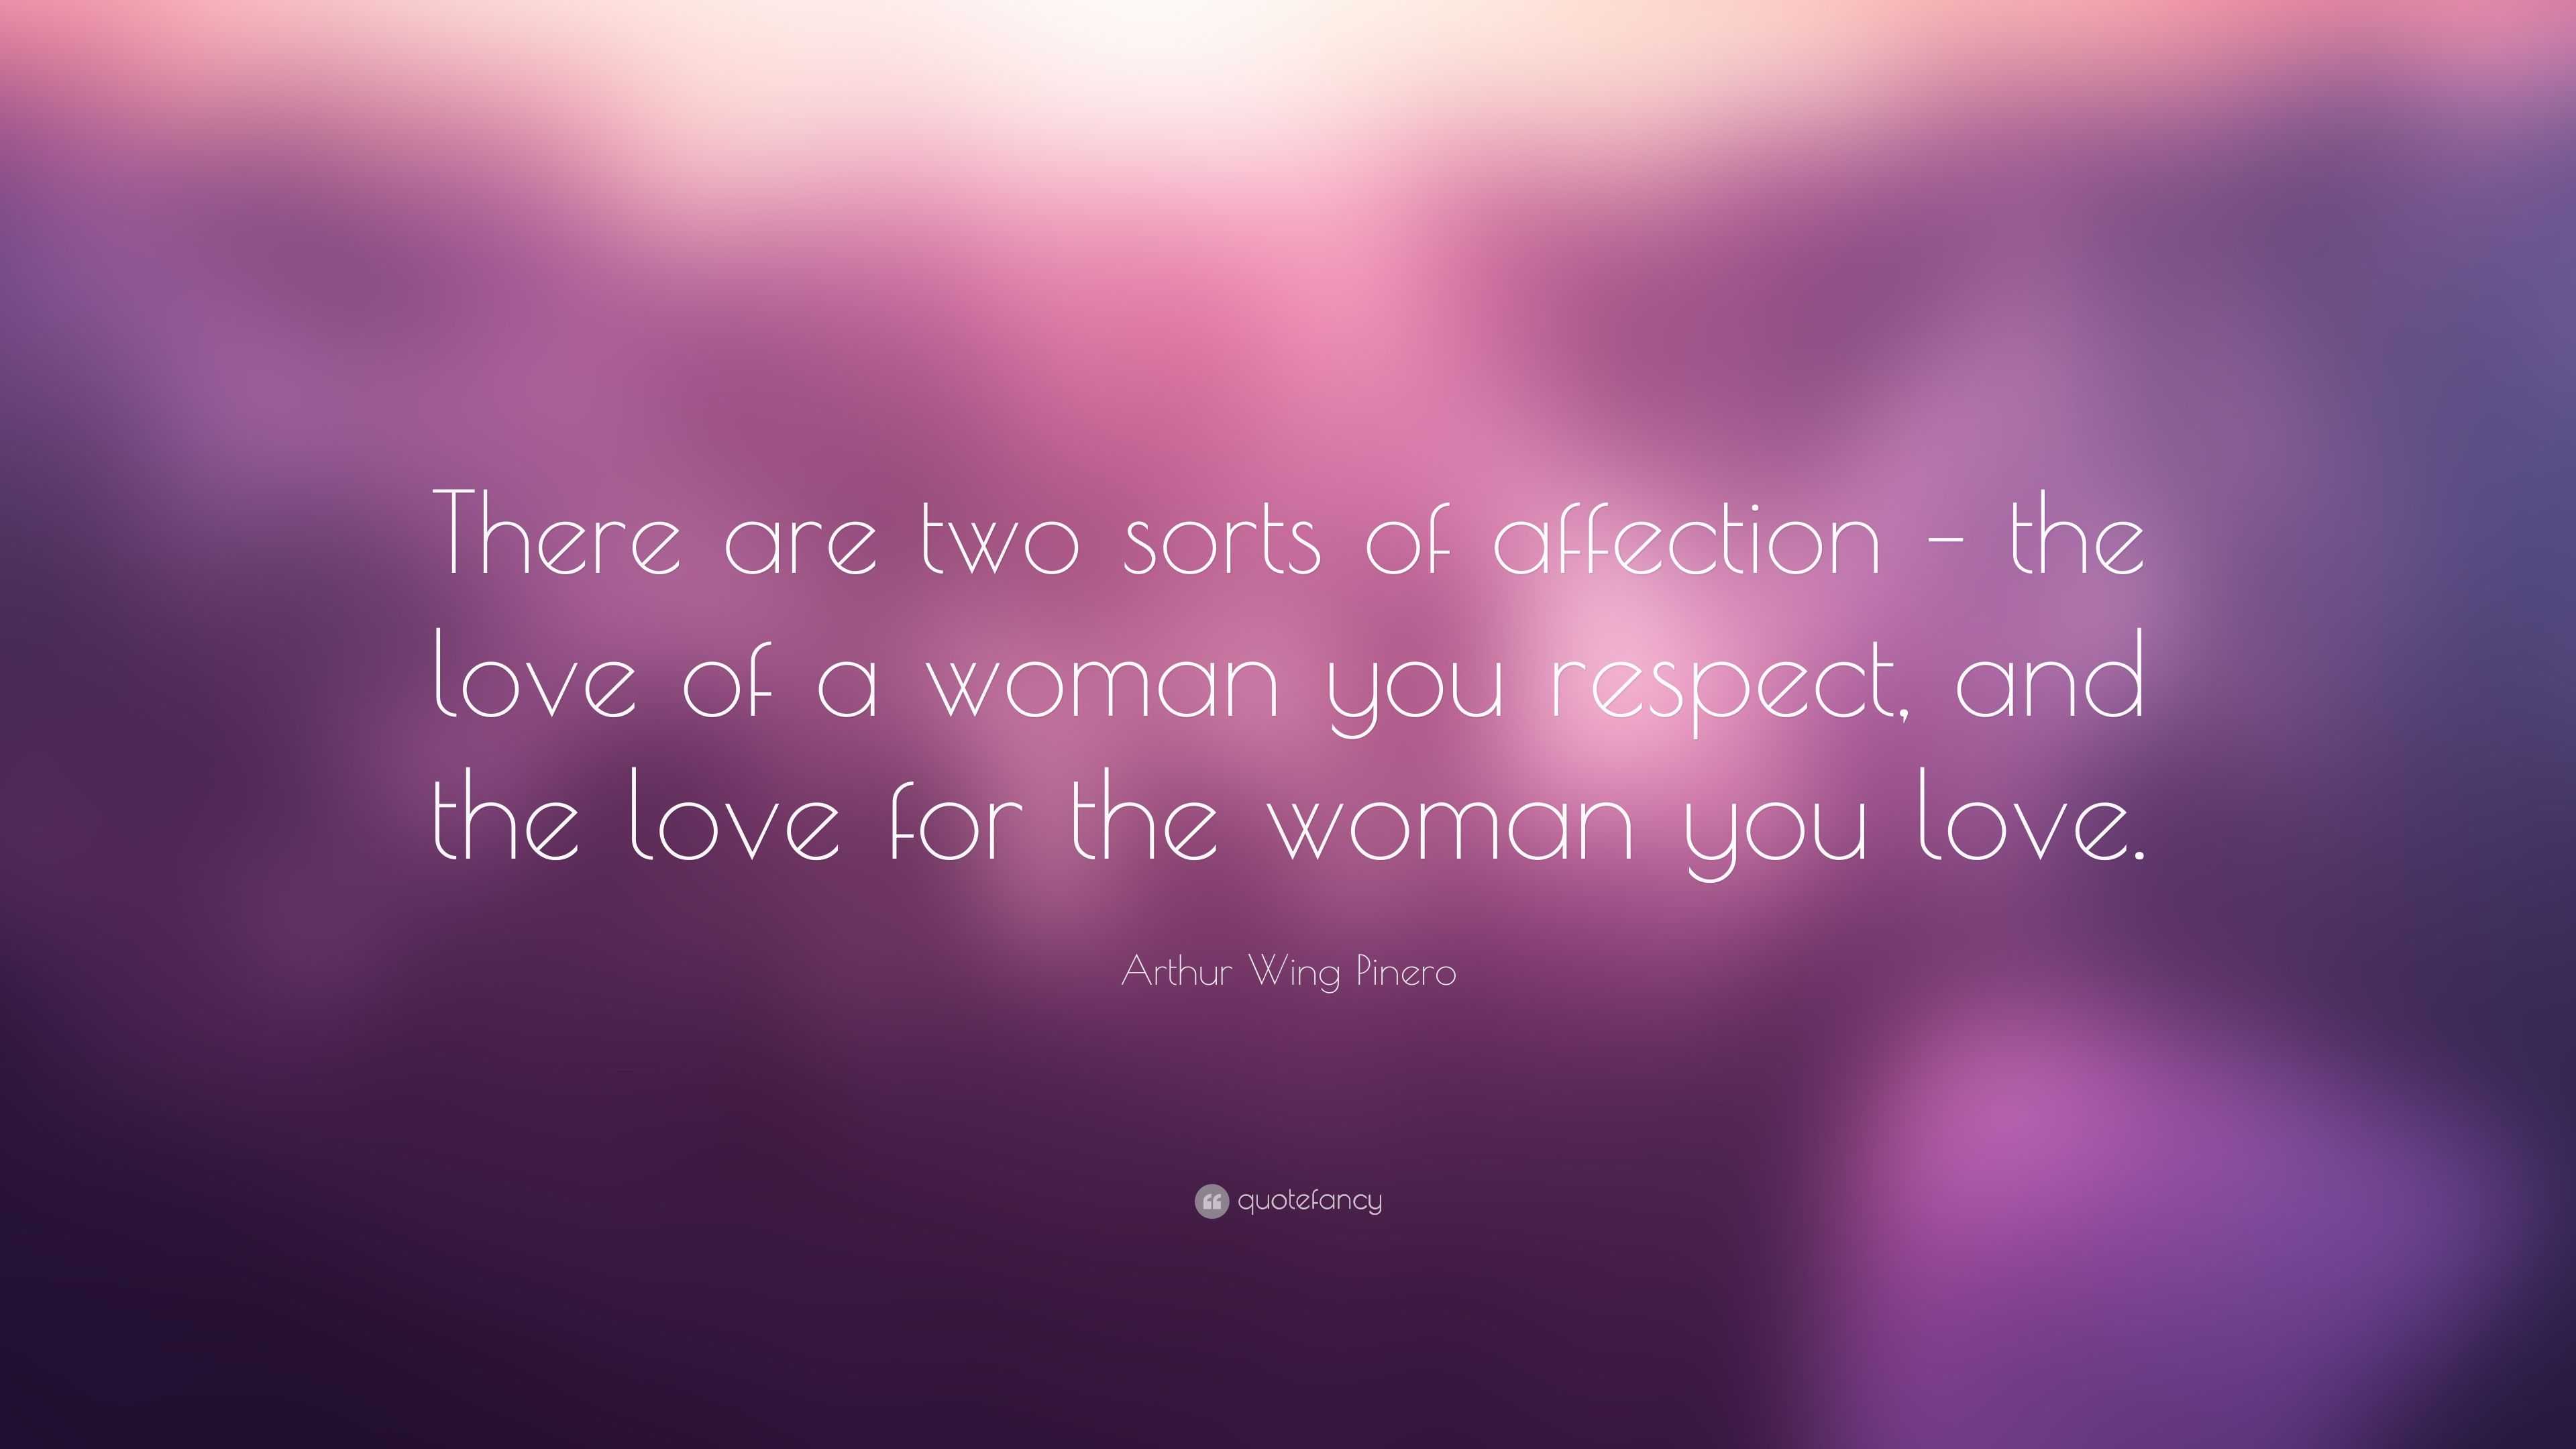 Arthur Wing Pinero quote: There are two sorts of affection - the love of